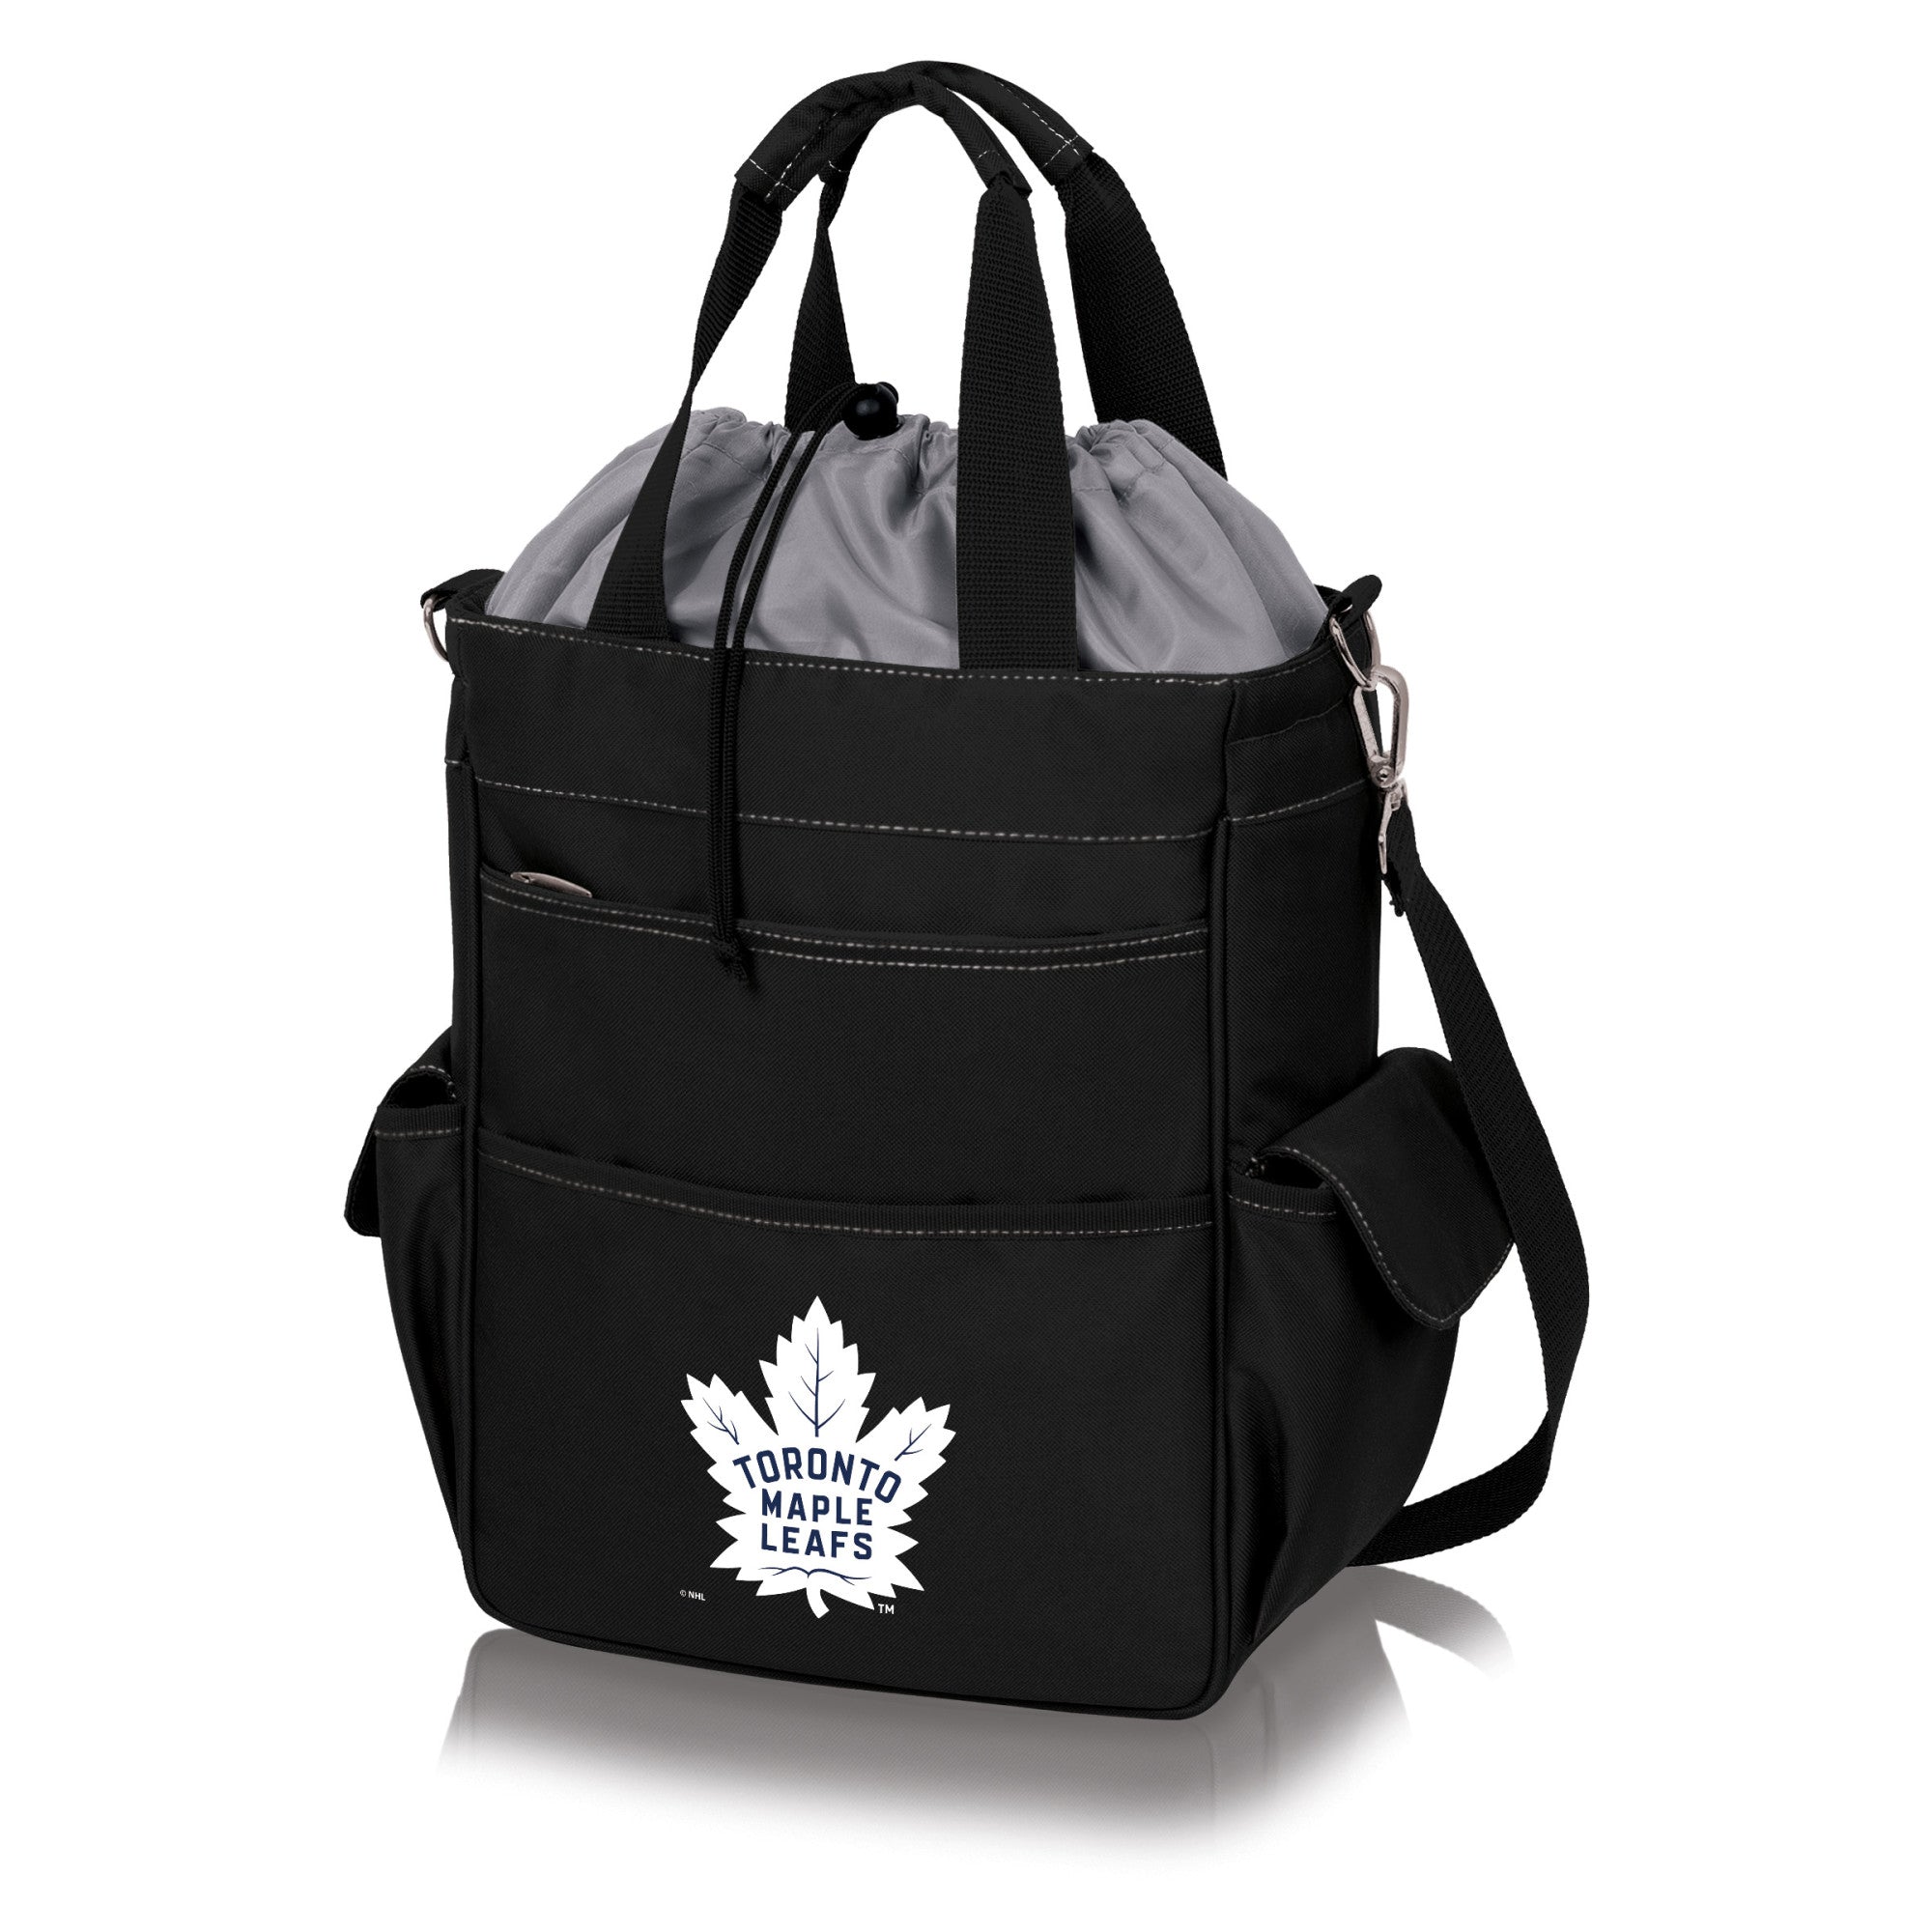 Toronto Maple Leafs - Activo Cooler Tote Bag